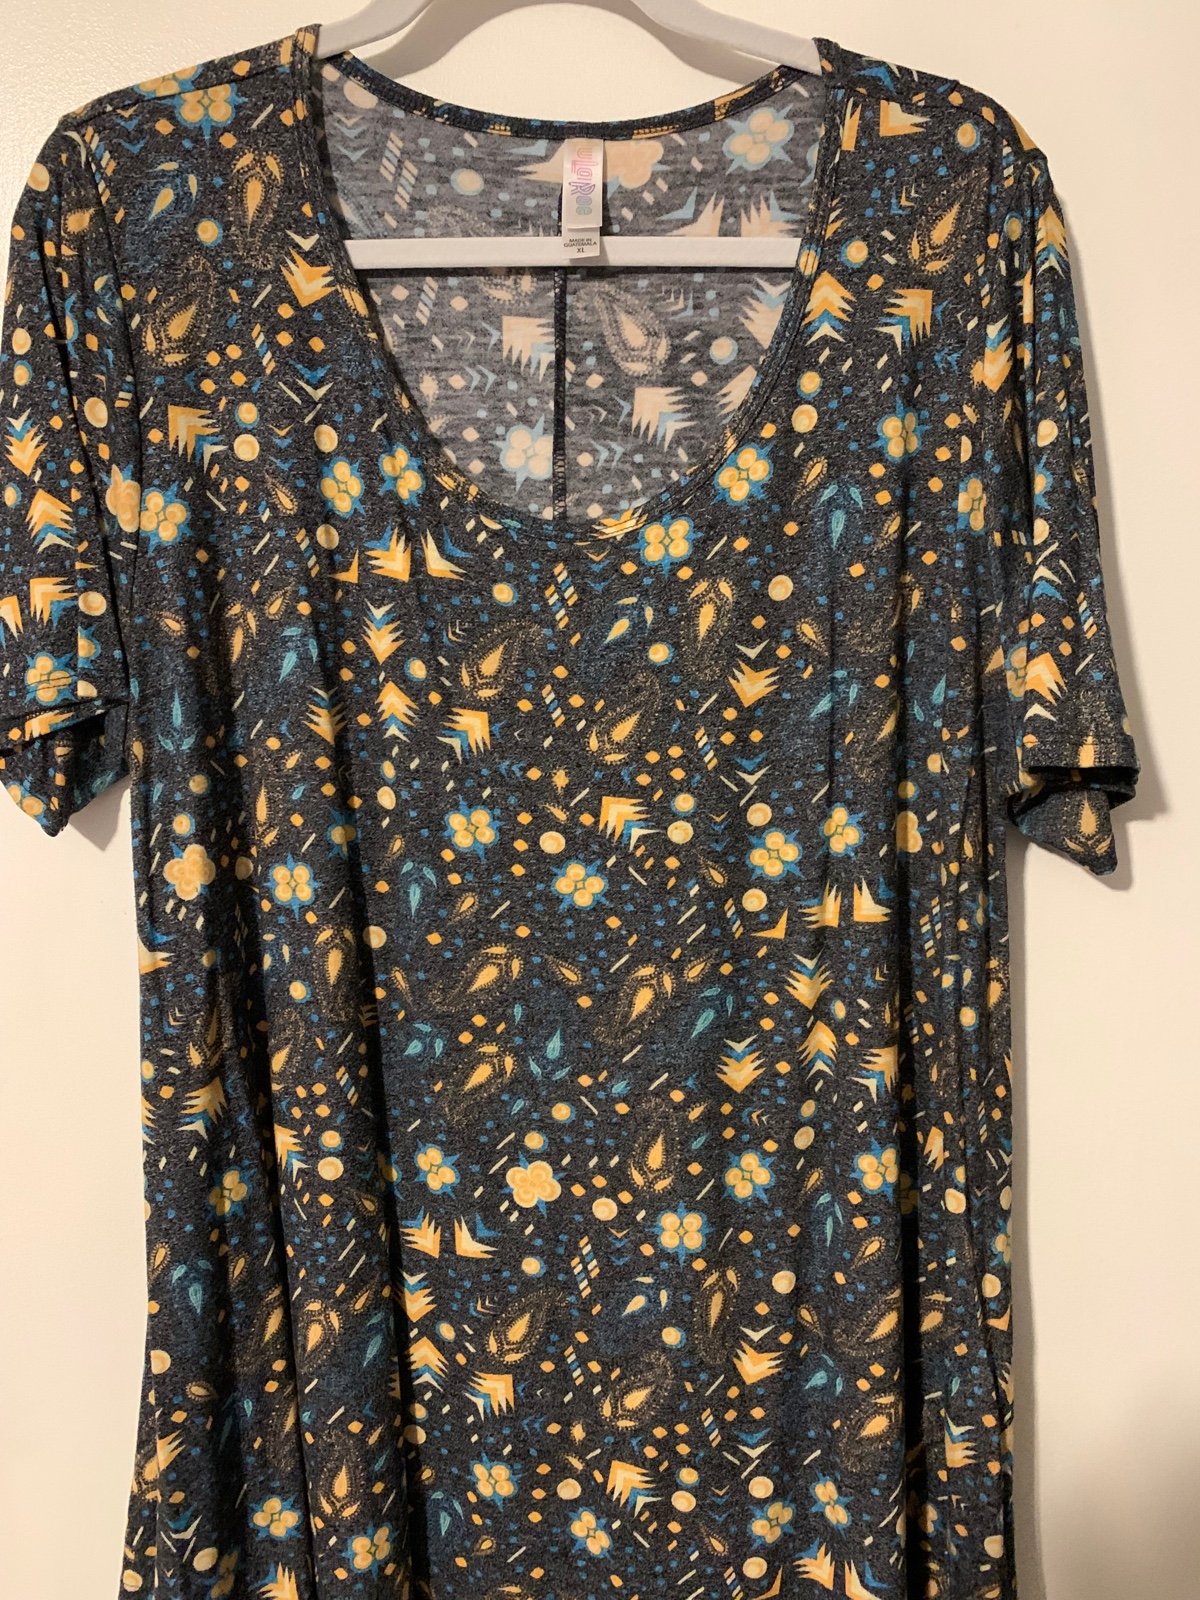 large selection Lularoe Perfect T (XL) gy6UnE5fi Online